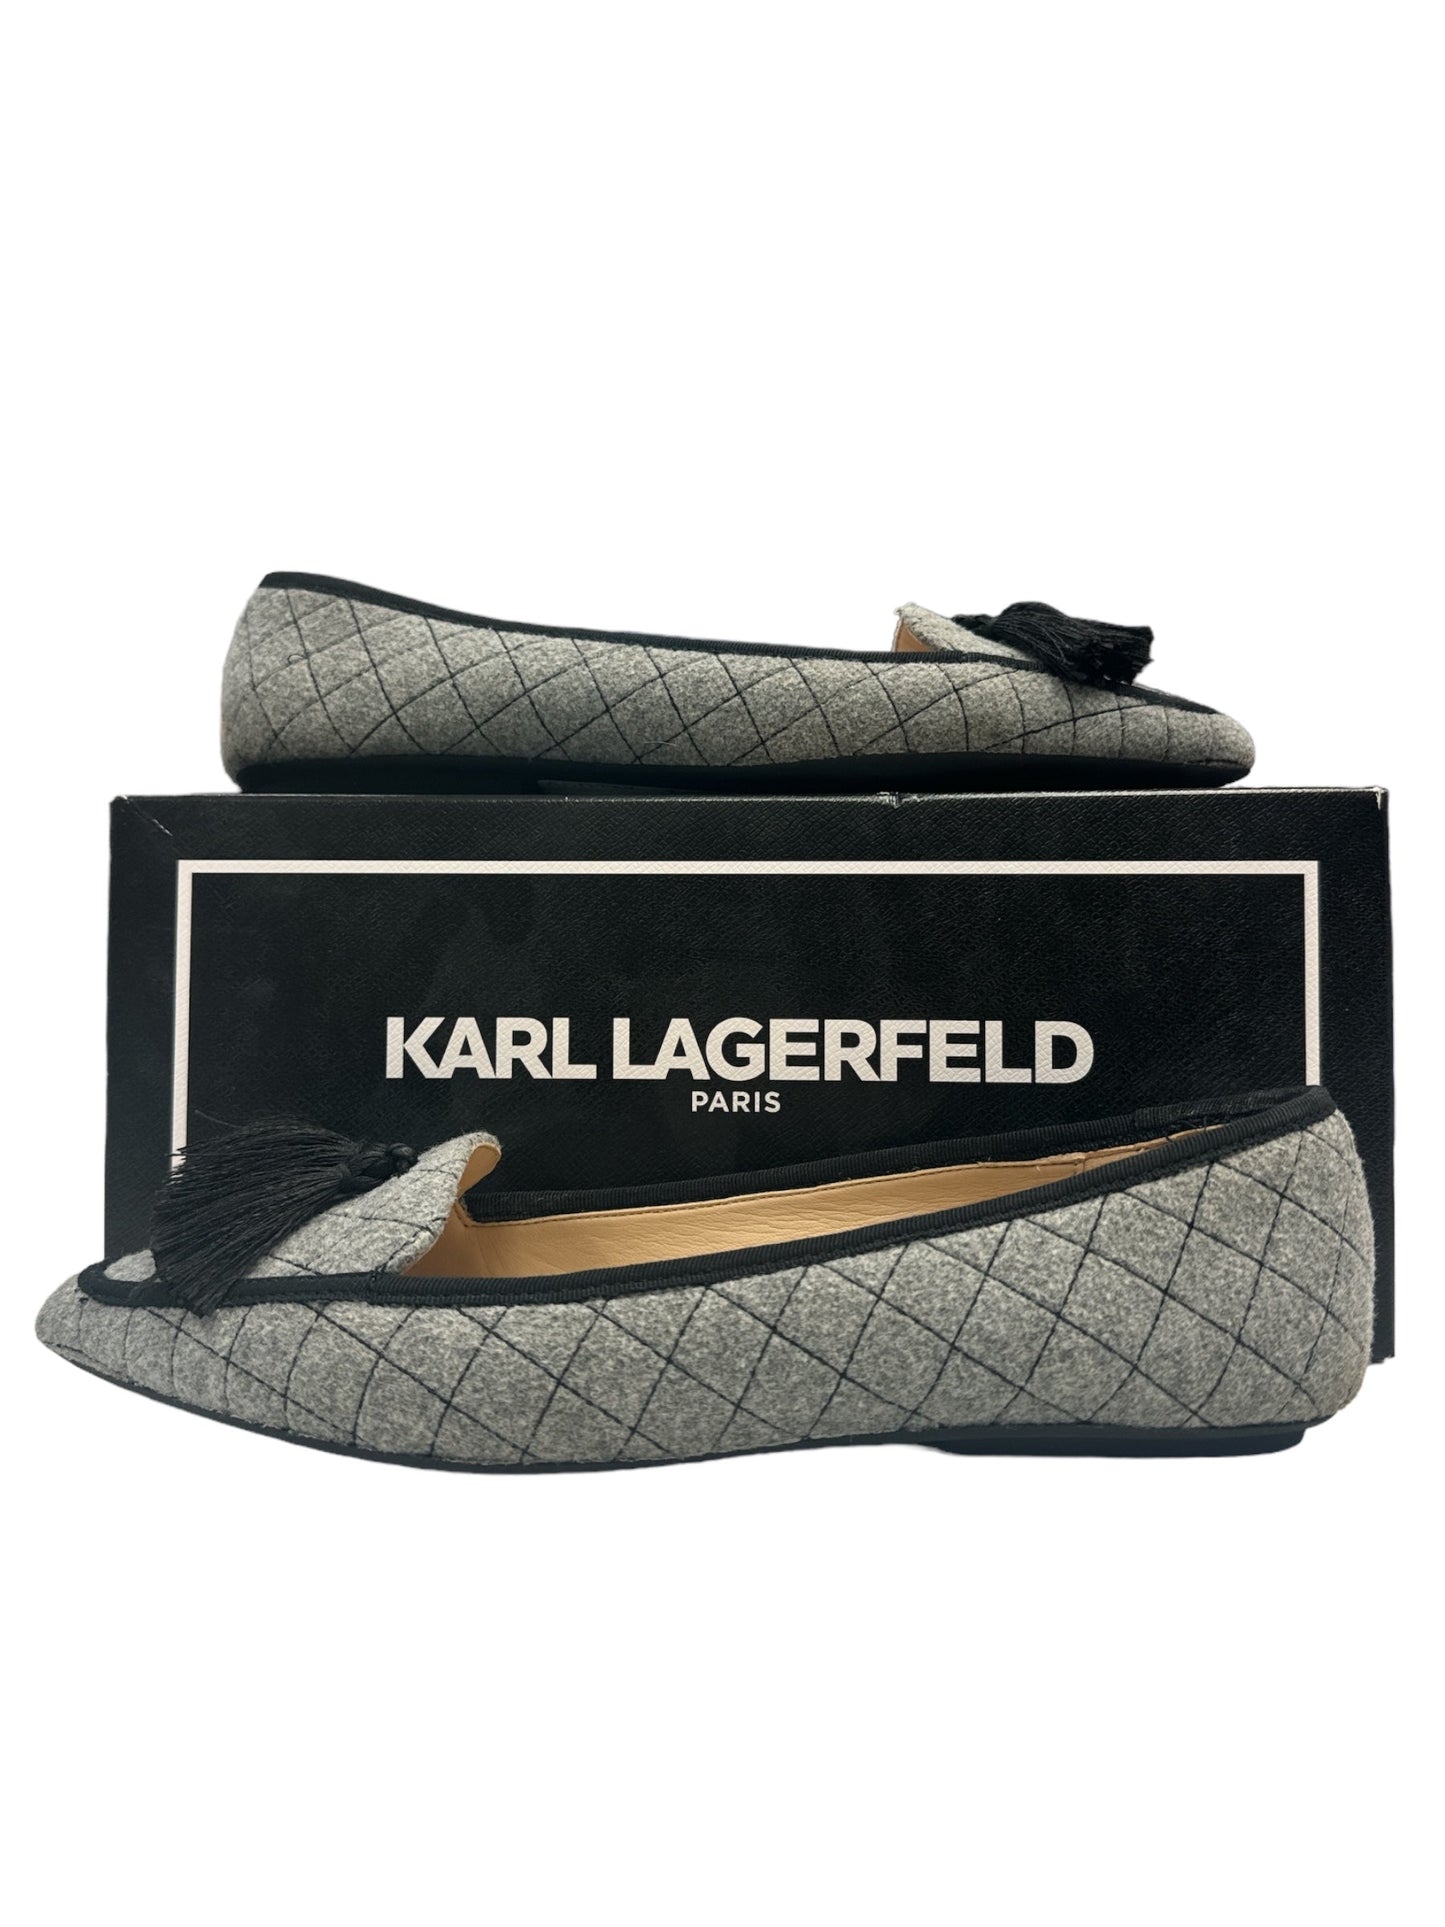 Shoes Flats By Karl Lagerfeld  Size: 8.5